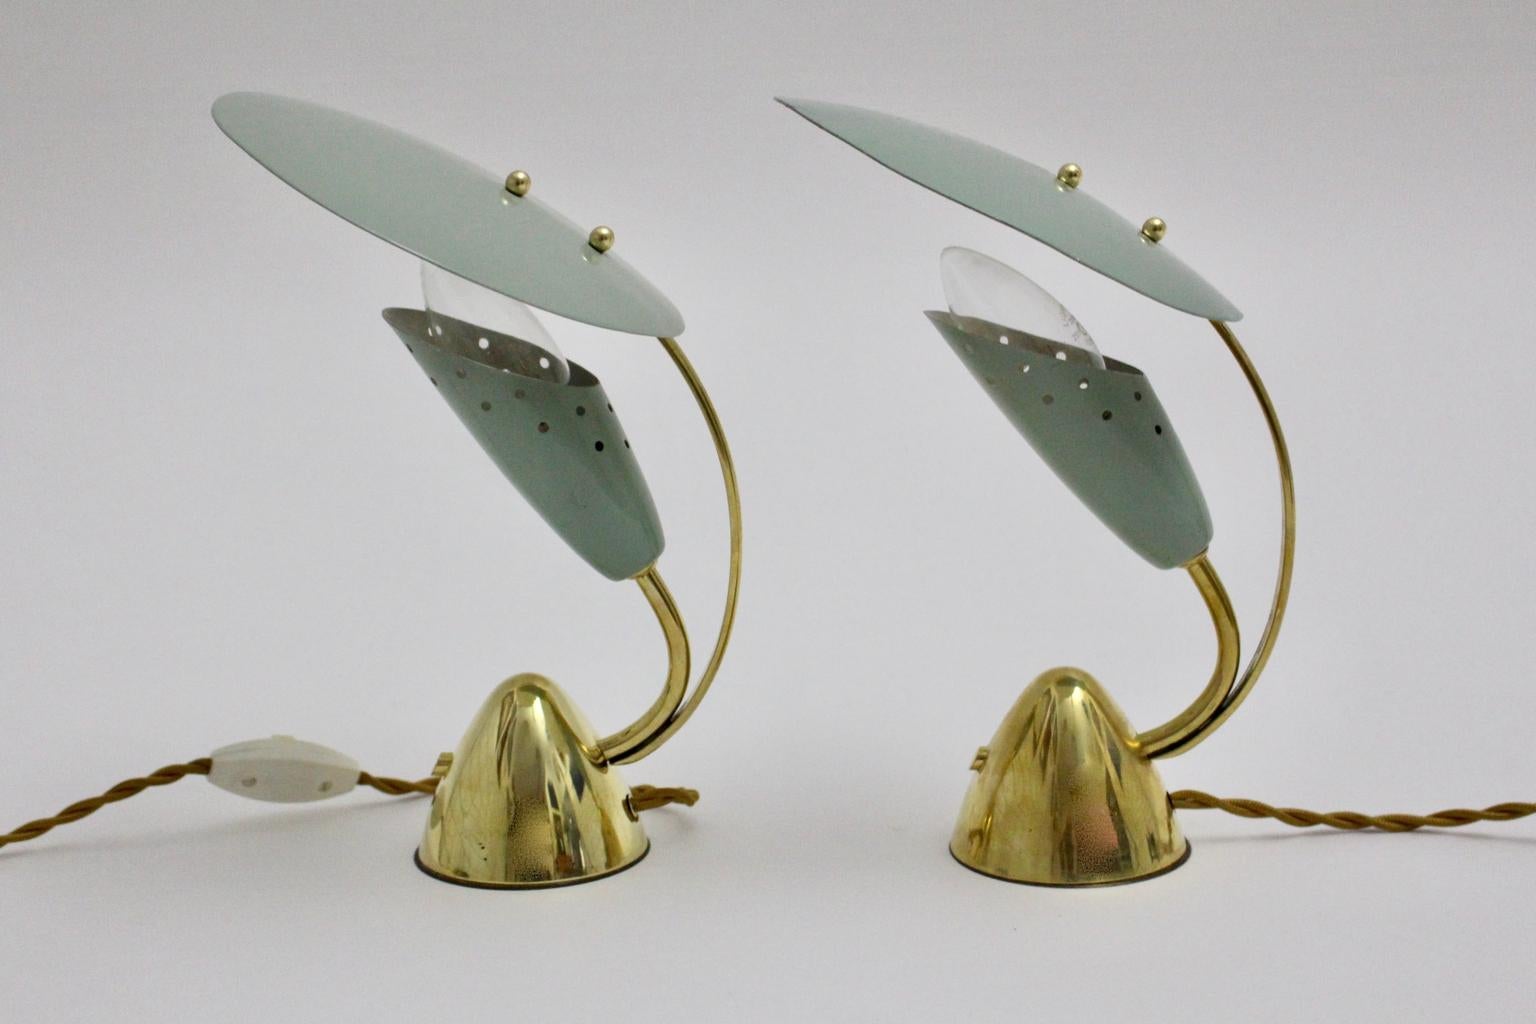 This pair of charming pistachio green bedside- or table lamps by Arredoluce, Italy, features a diffuser.
The bedside lamps were made of brass, pistachio green and white lacquered metal and brass details.
The original condition is very good with